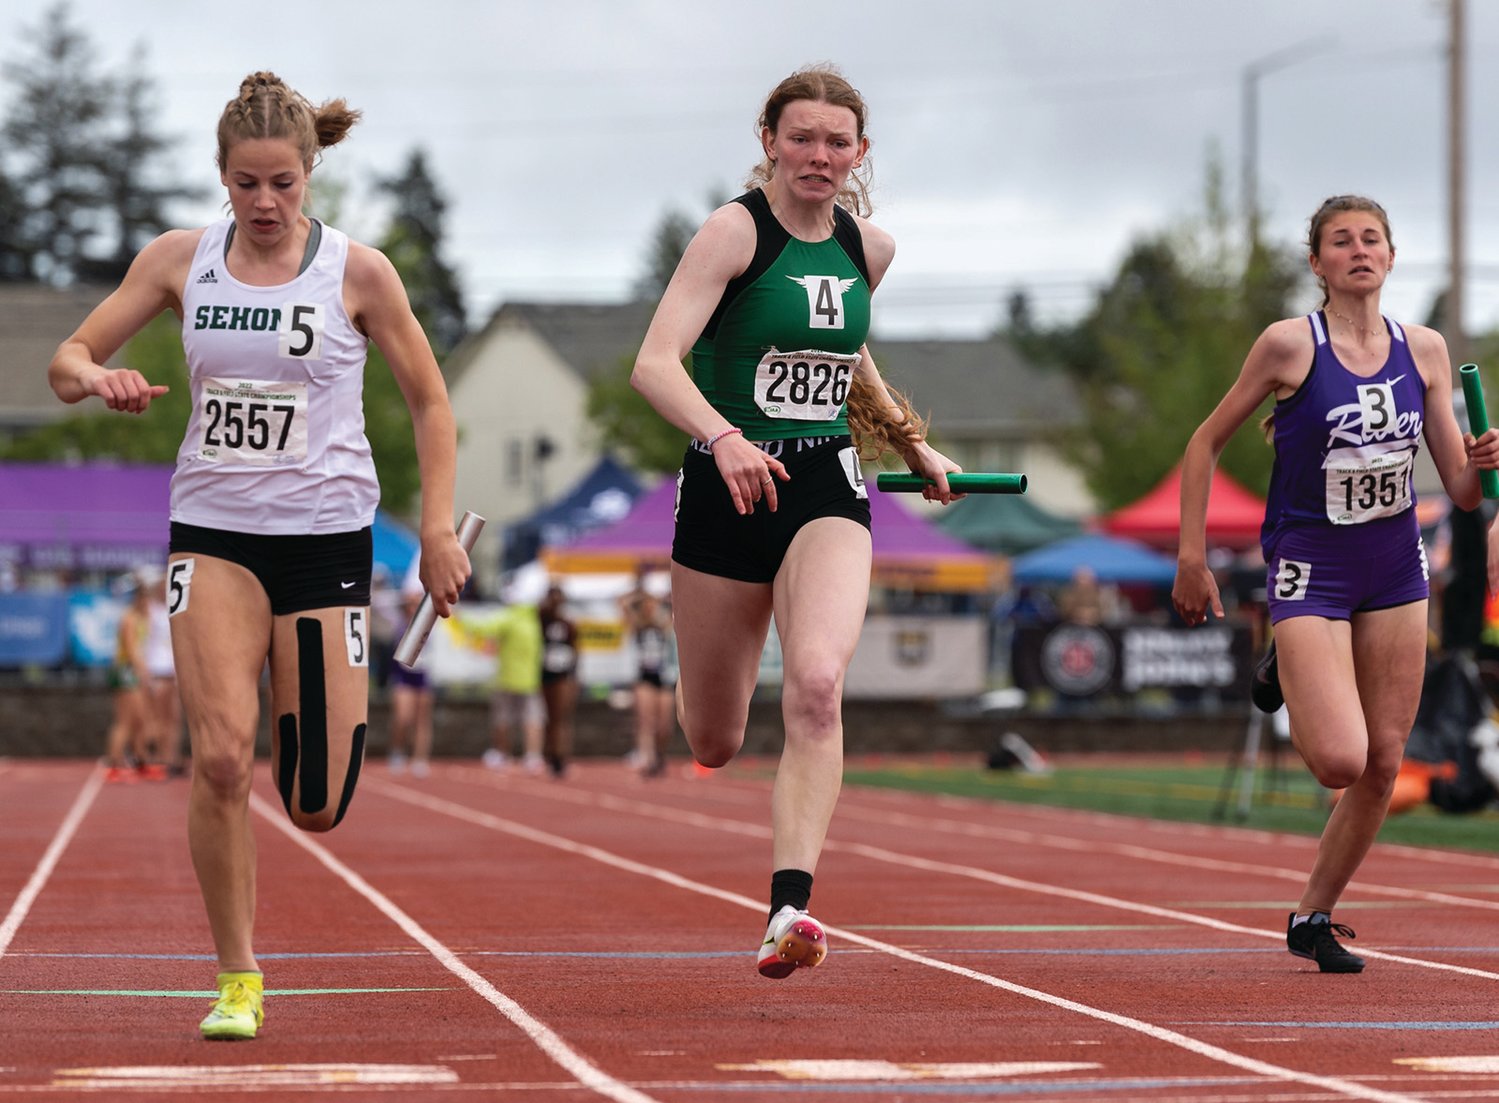 Tumwater's Alyssa Duncan races past the finish line in a 2A Girls 4x100 Prelim at the 4A/3A/2A State Track and Field Championships on Friday, May 27, 2022, at Mount Tahoma High School in Tacoma. (Joshua Hart/For The Chronicle)